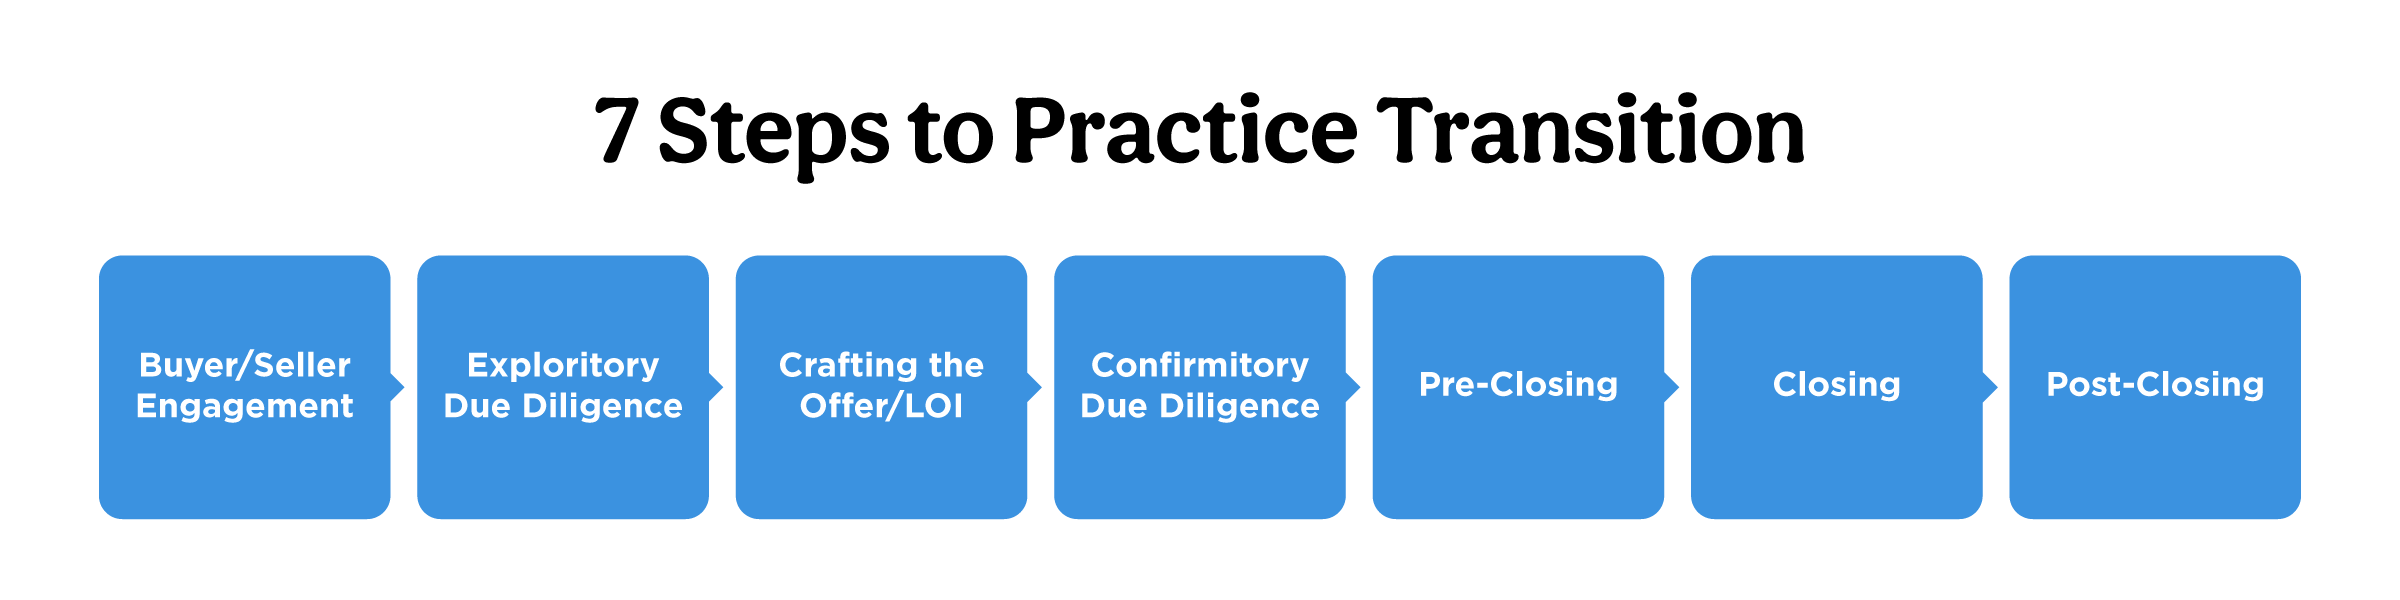 7 steps to practice transition